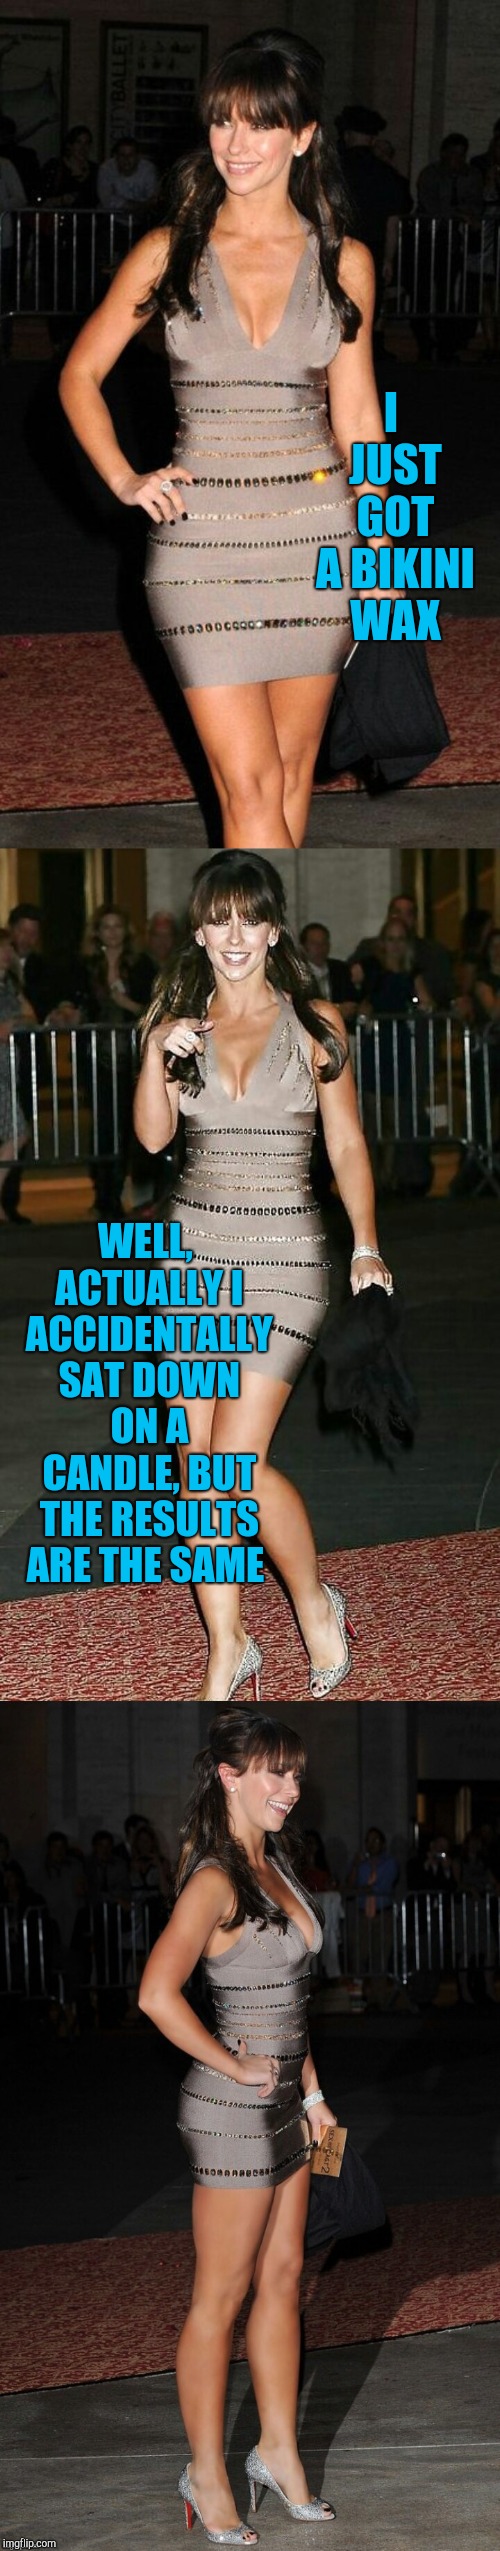 Jennifer Love Hewitt joke template  | I JUST GOT A BIKINI WAX; WELL, ACTUALLY I ACCIDENTALLY SAT DOWN ON A CANDLE, BUT THE RESULTS ARE THE SAME | image tagged in jennifer love hewitt joke template,jbmemegeek,jennifer love hewitt | made w/ Imgflip meme maker